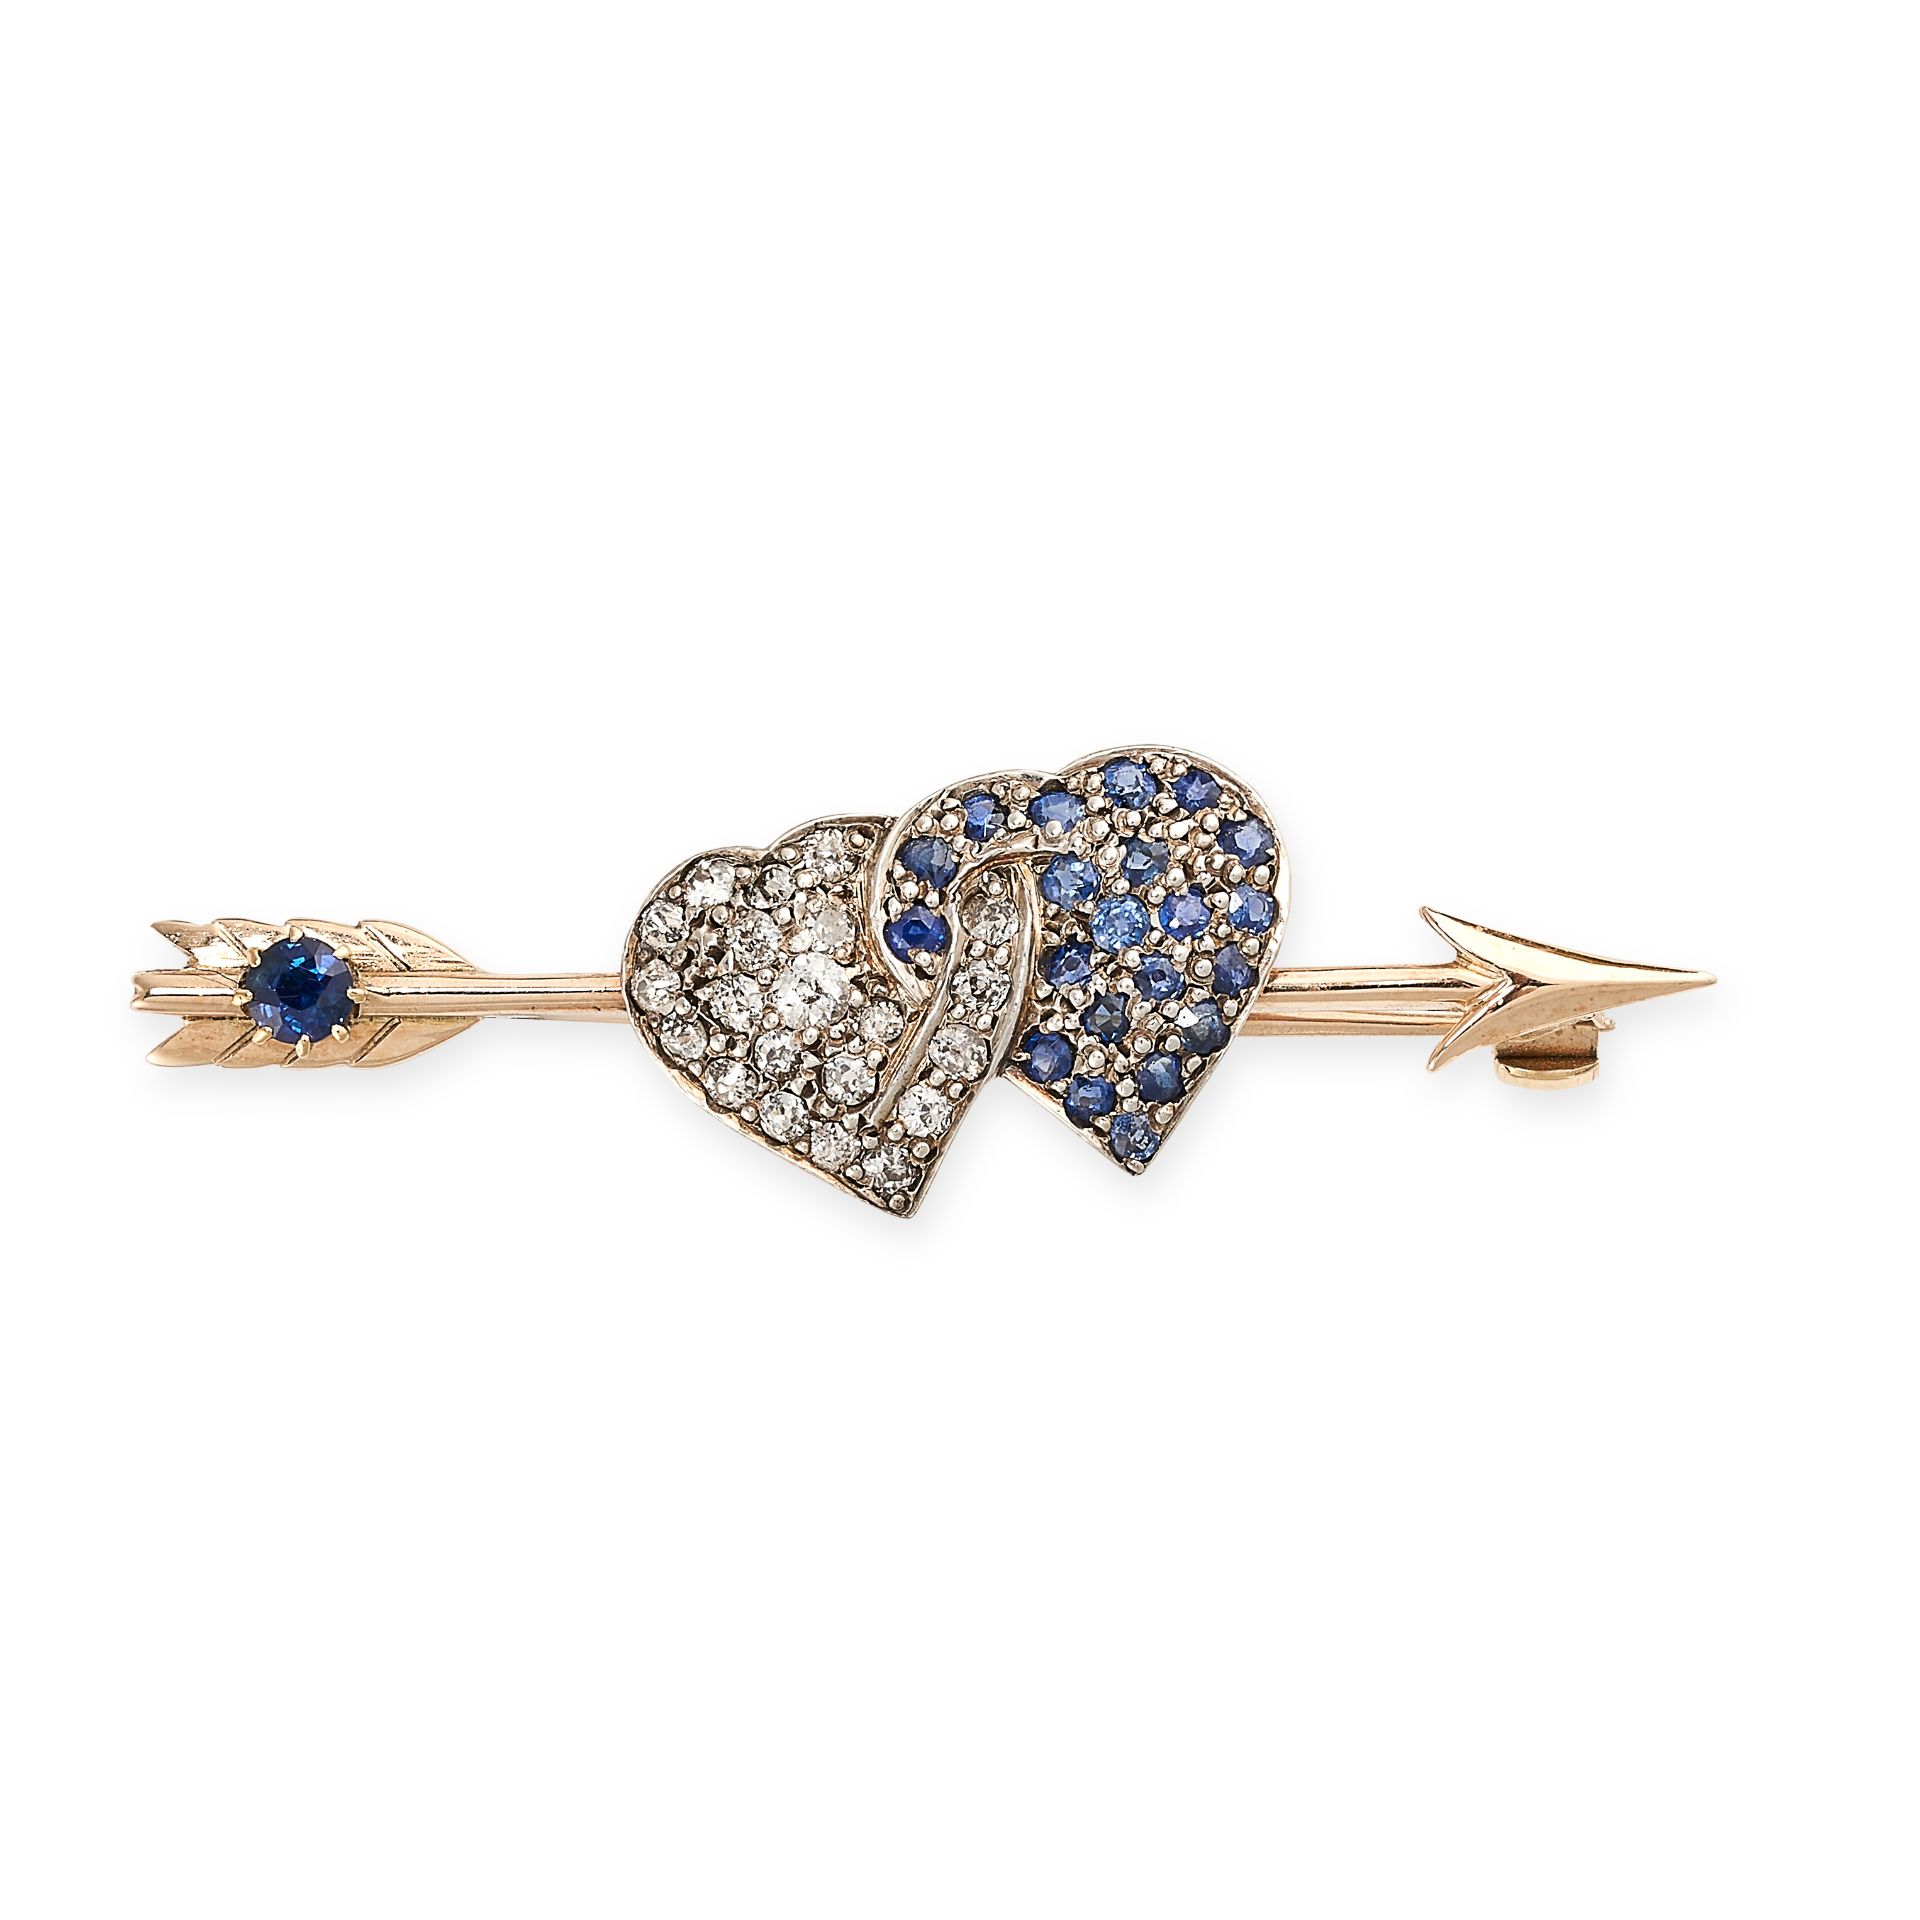 NO RESERVE - AN EARLY 20TH CENTURY DIAMOND AND SAPPHIRE HEART BROOCH, CIRCA 1903 in silver and gold,